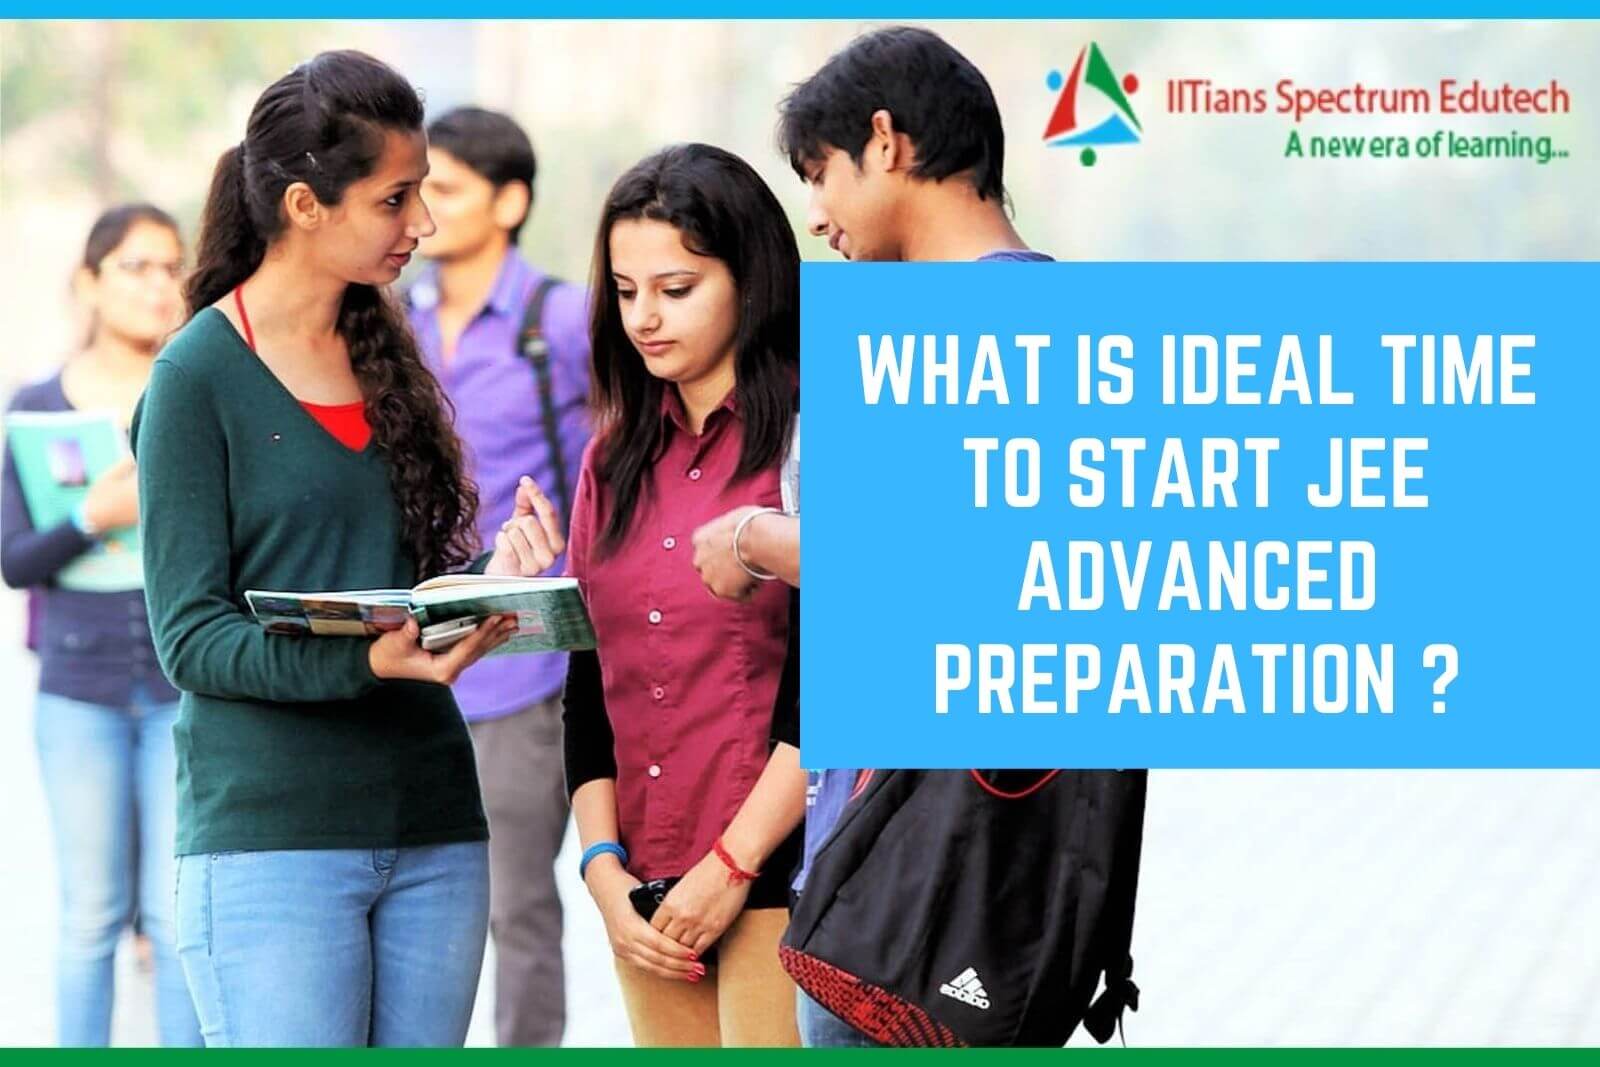 What is the ideal time to start JEE Advanced preparation ?